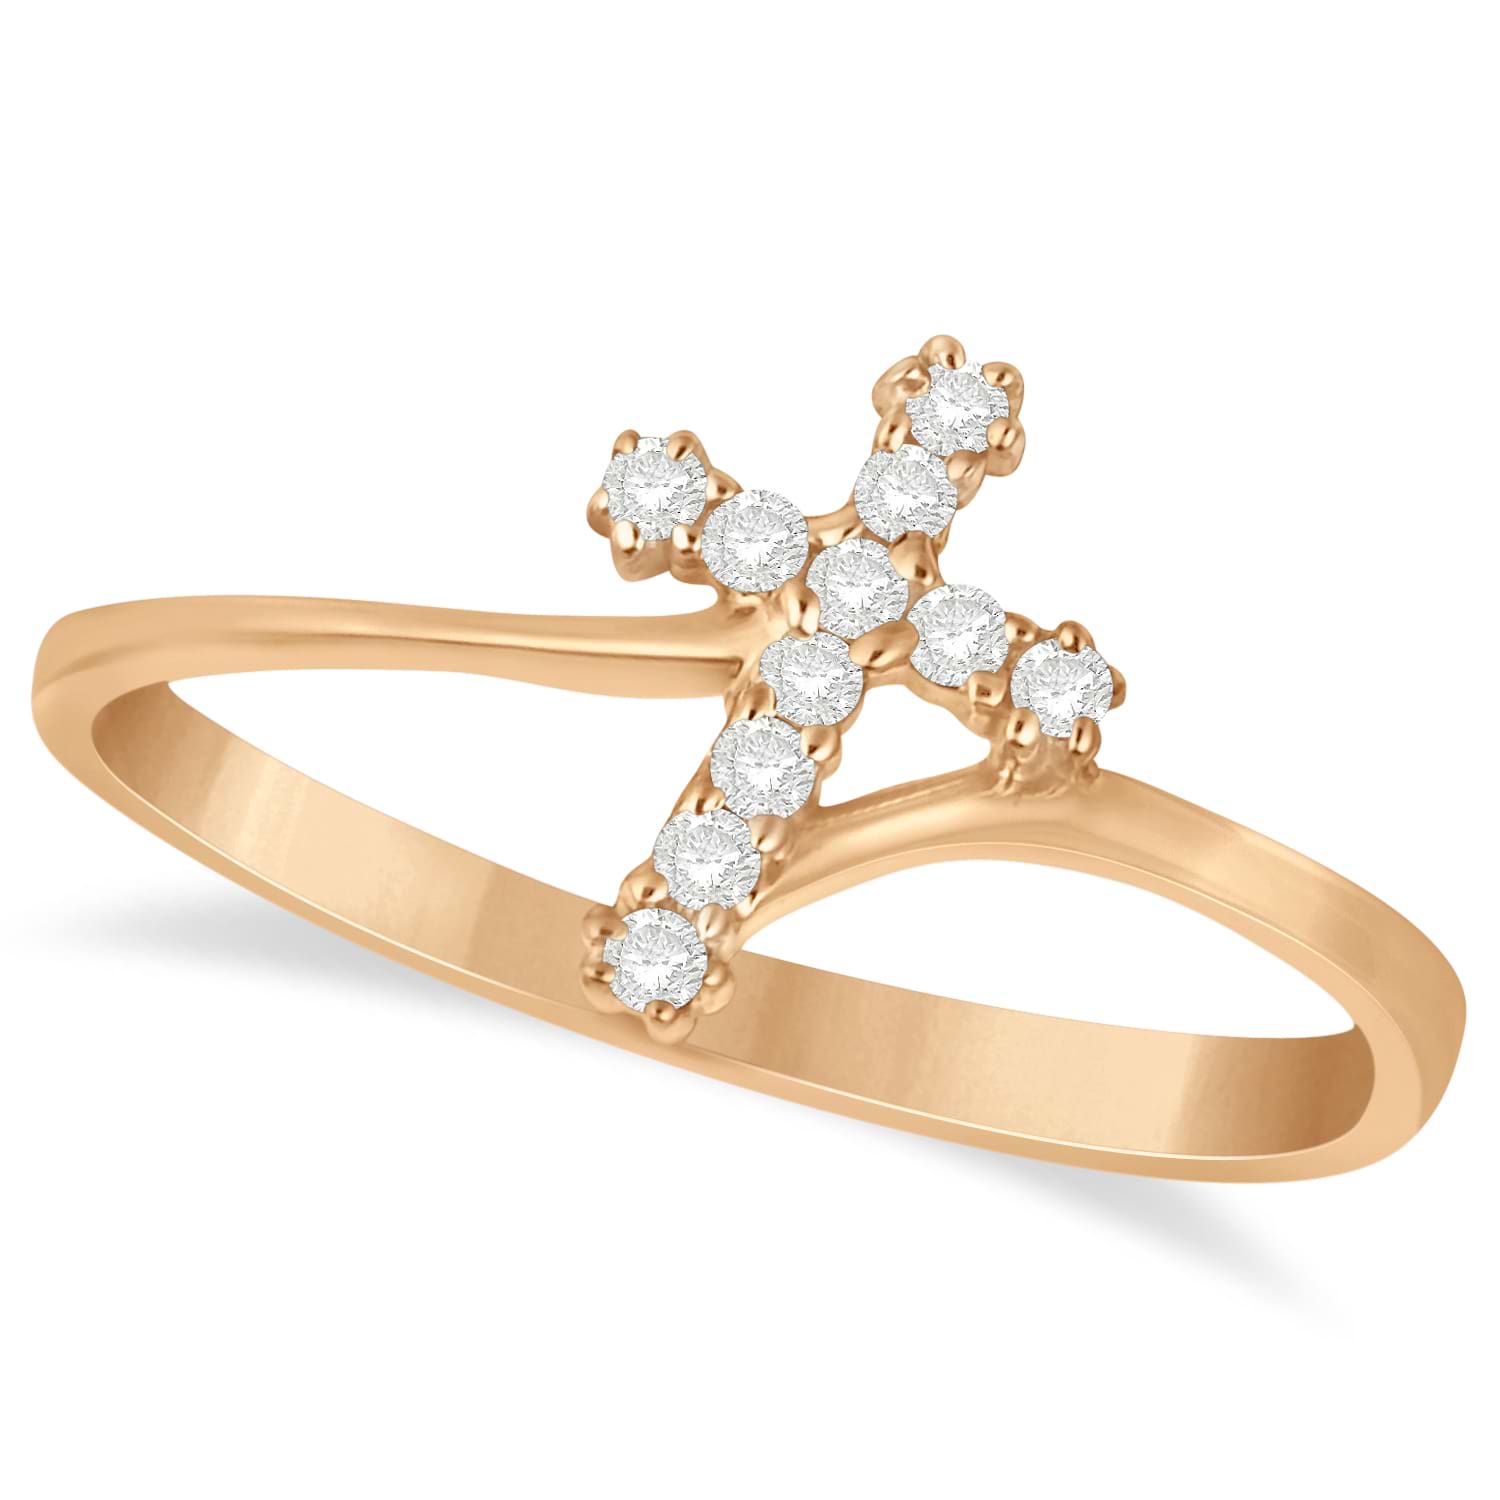 Diamond Religious Cross Twisted Ring 14k Rose Gold (0.10ct)